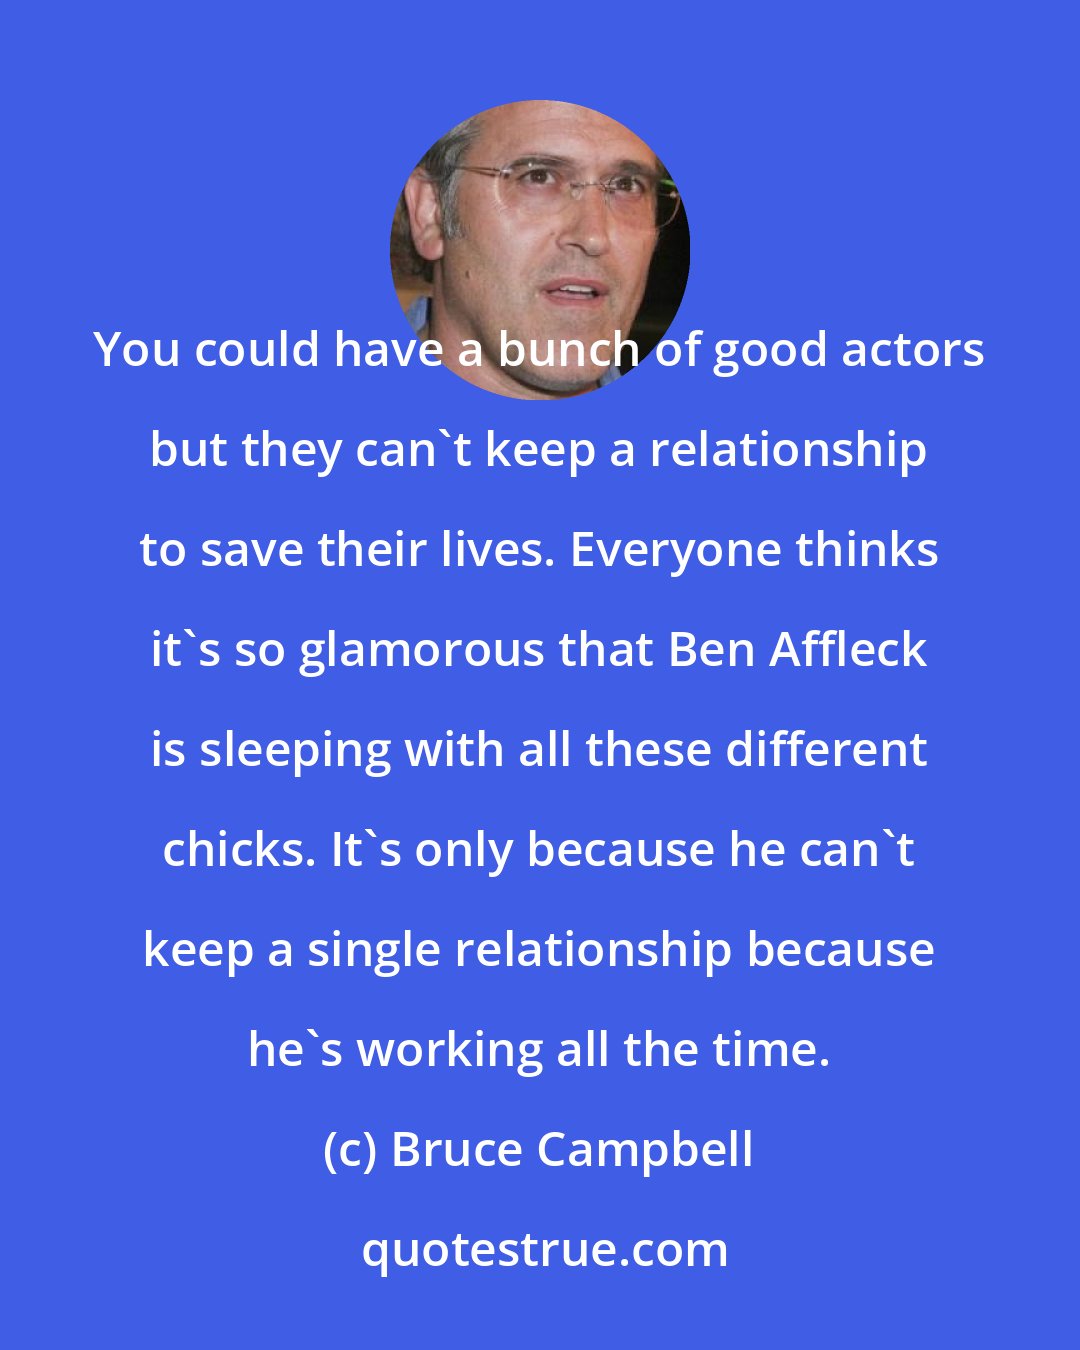 Bruce Campbell: You could have a bunch of good actors but they can't keep a relationship to save their lives. Everyone thinks it's so glamorous that Ben Affleck is sleeping with all these different chicks. It's only because he can't keep a single relationship because he's working all the time.